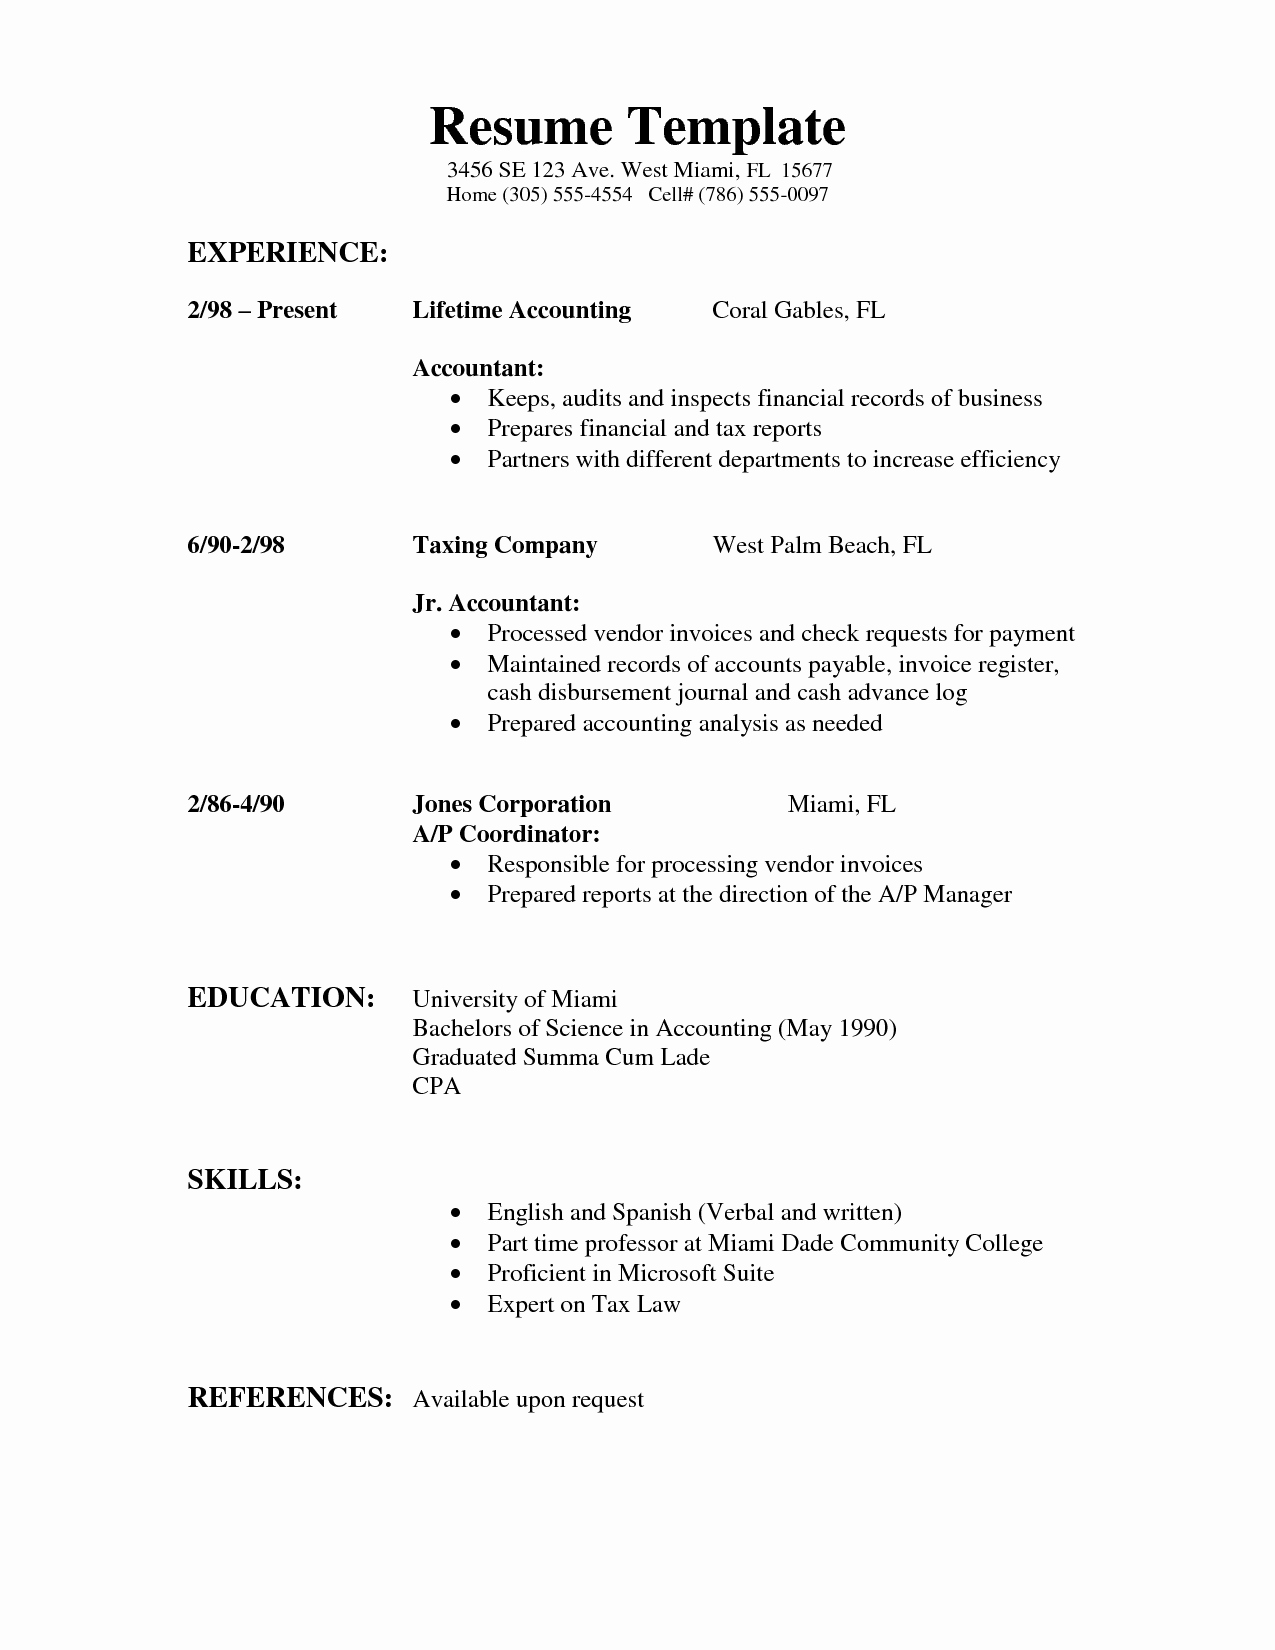 A Template for A Resume Inspirational Resume Templates